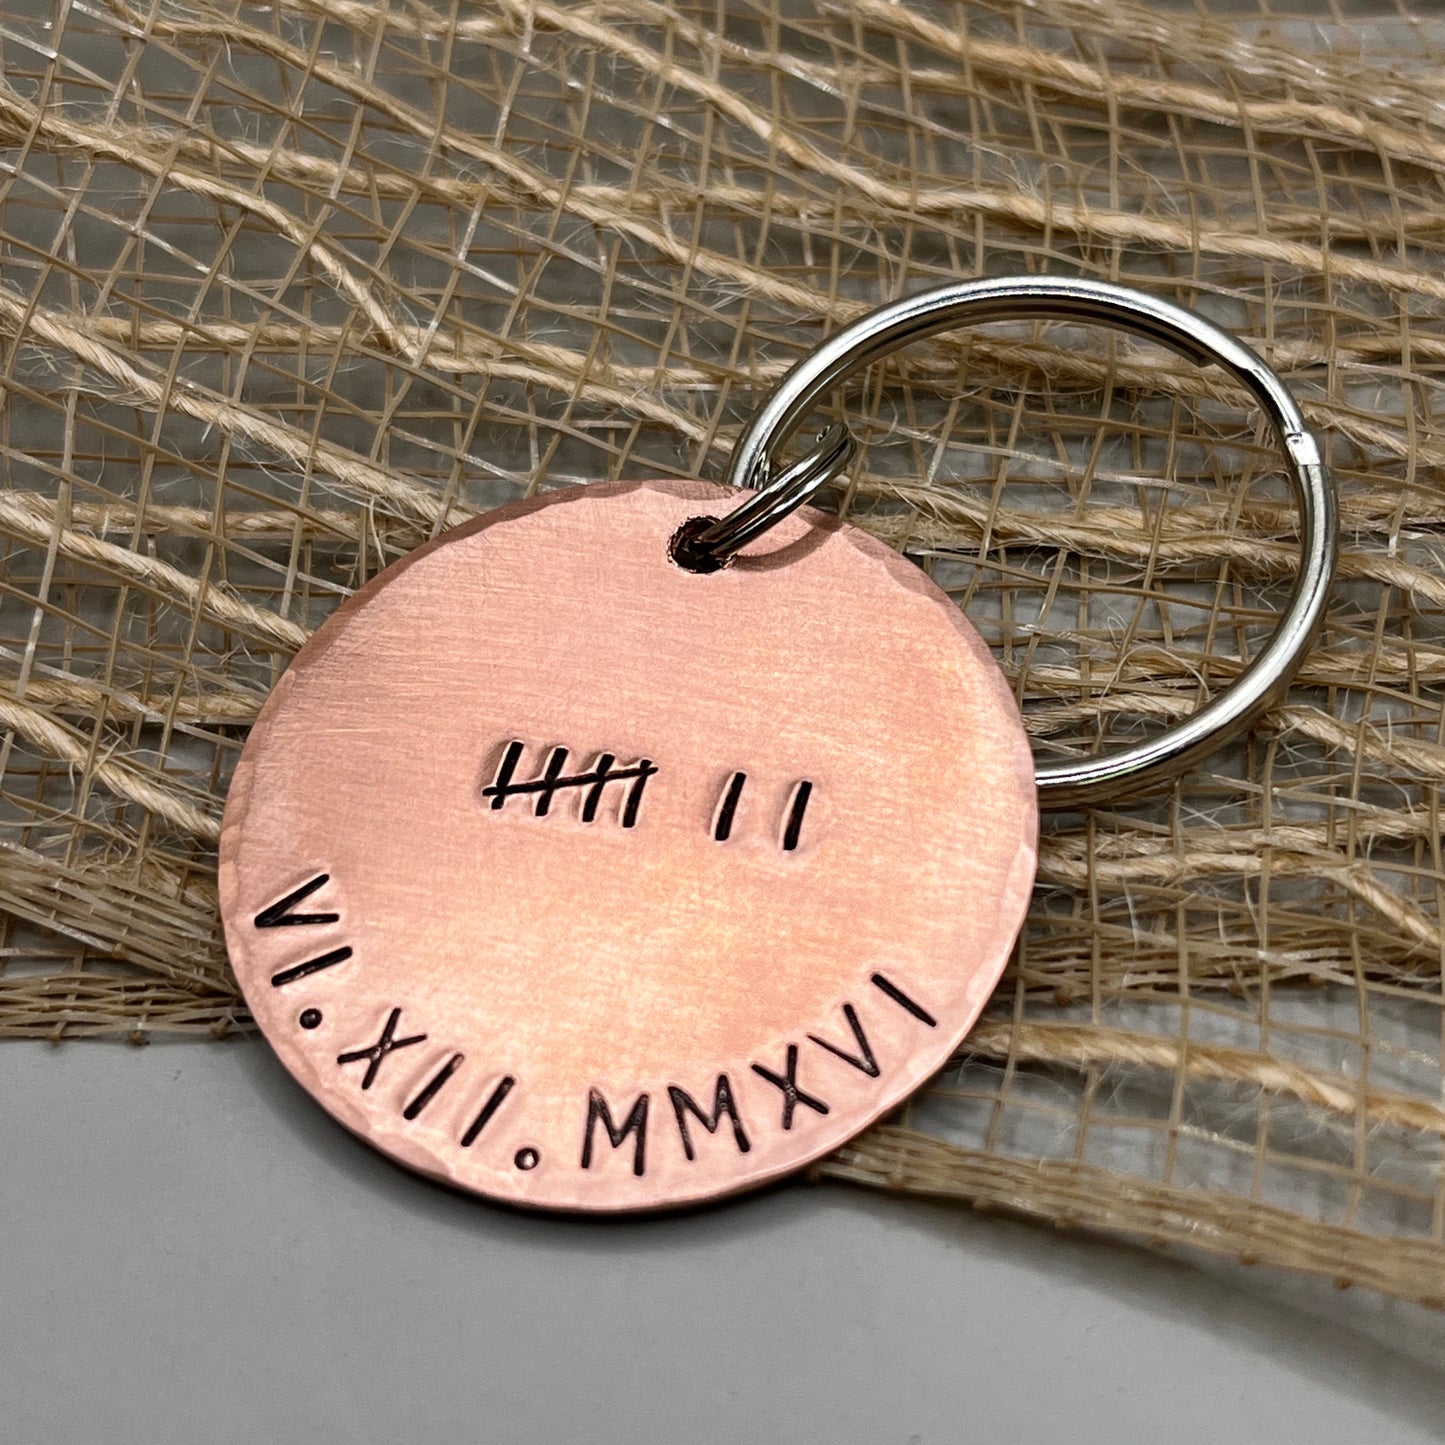 7th Anniversary Gift, Copper Anniversary Personalized Keychain, Anniversary Gifts for Him